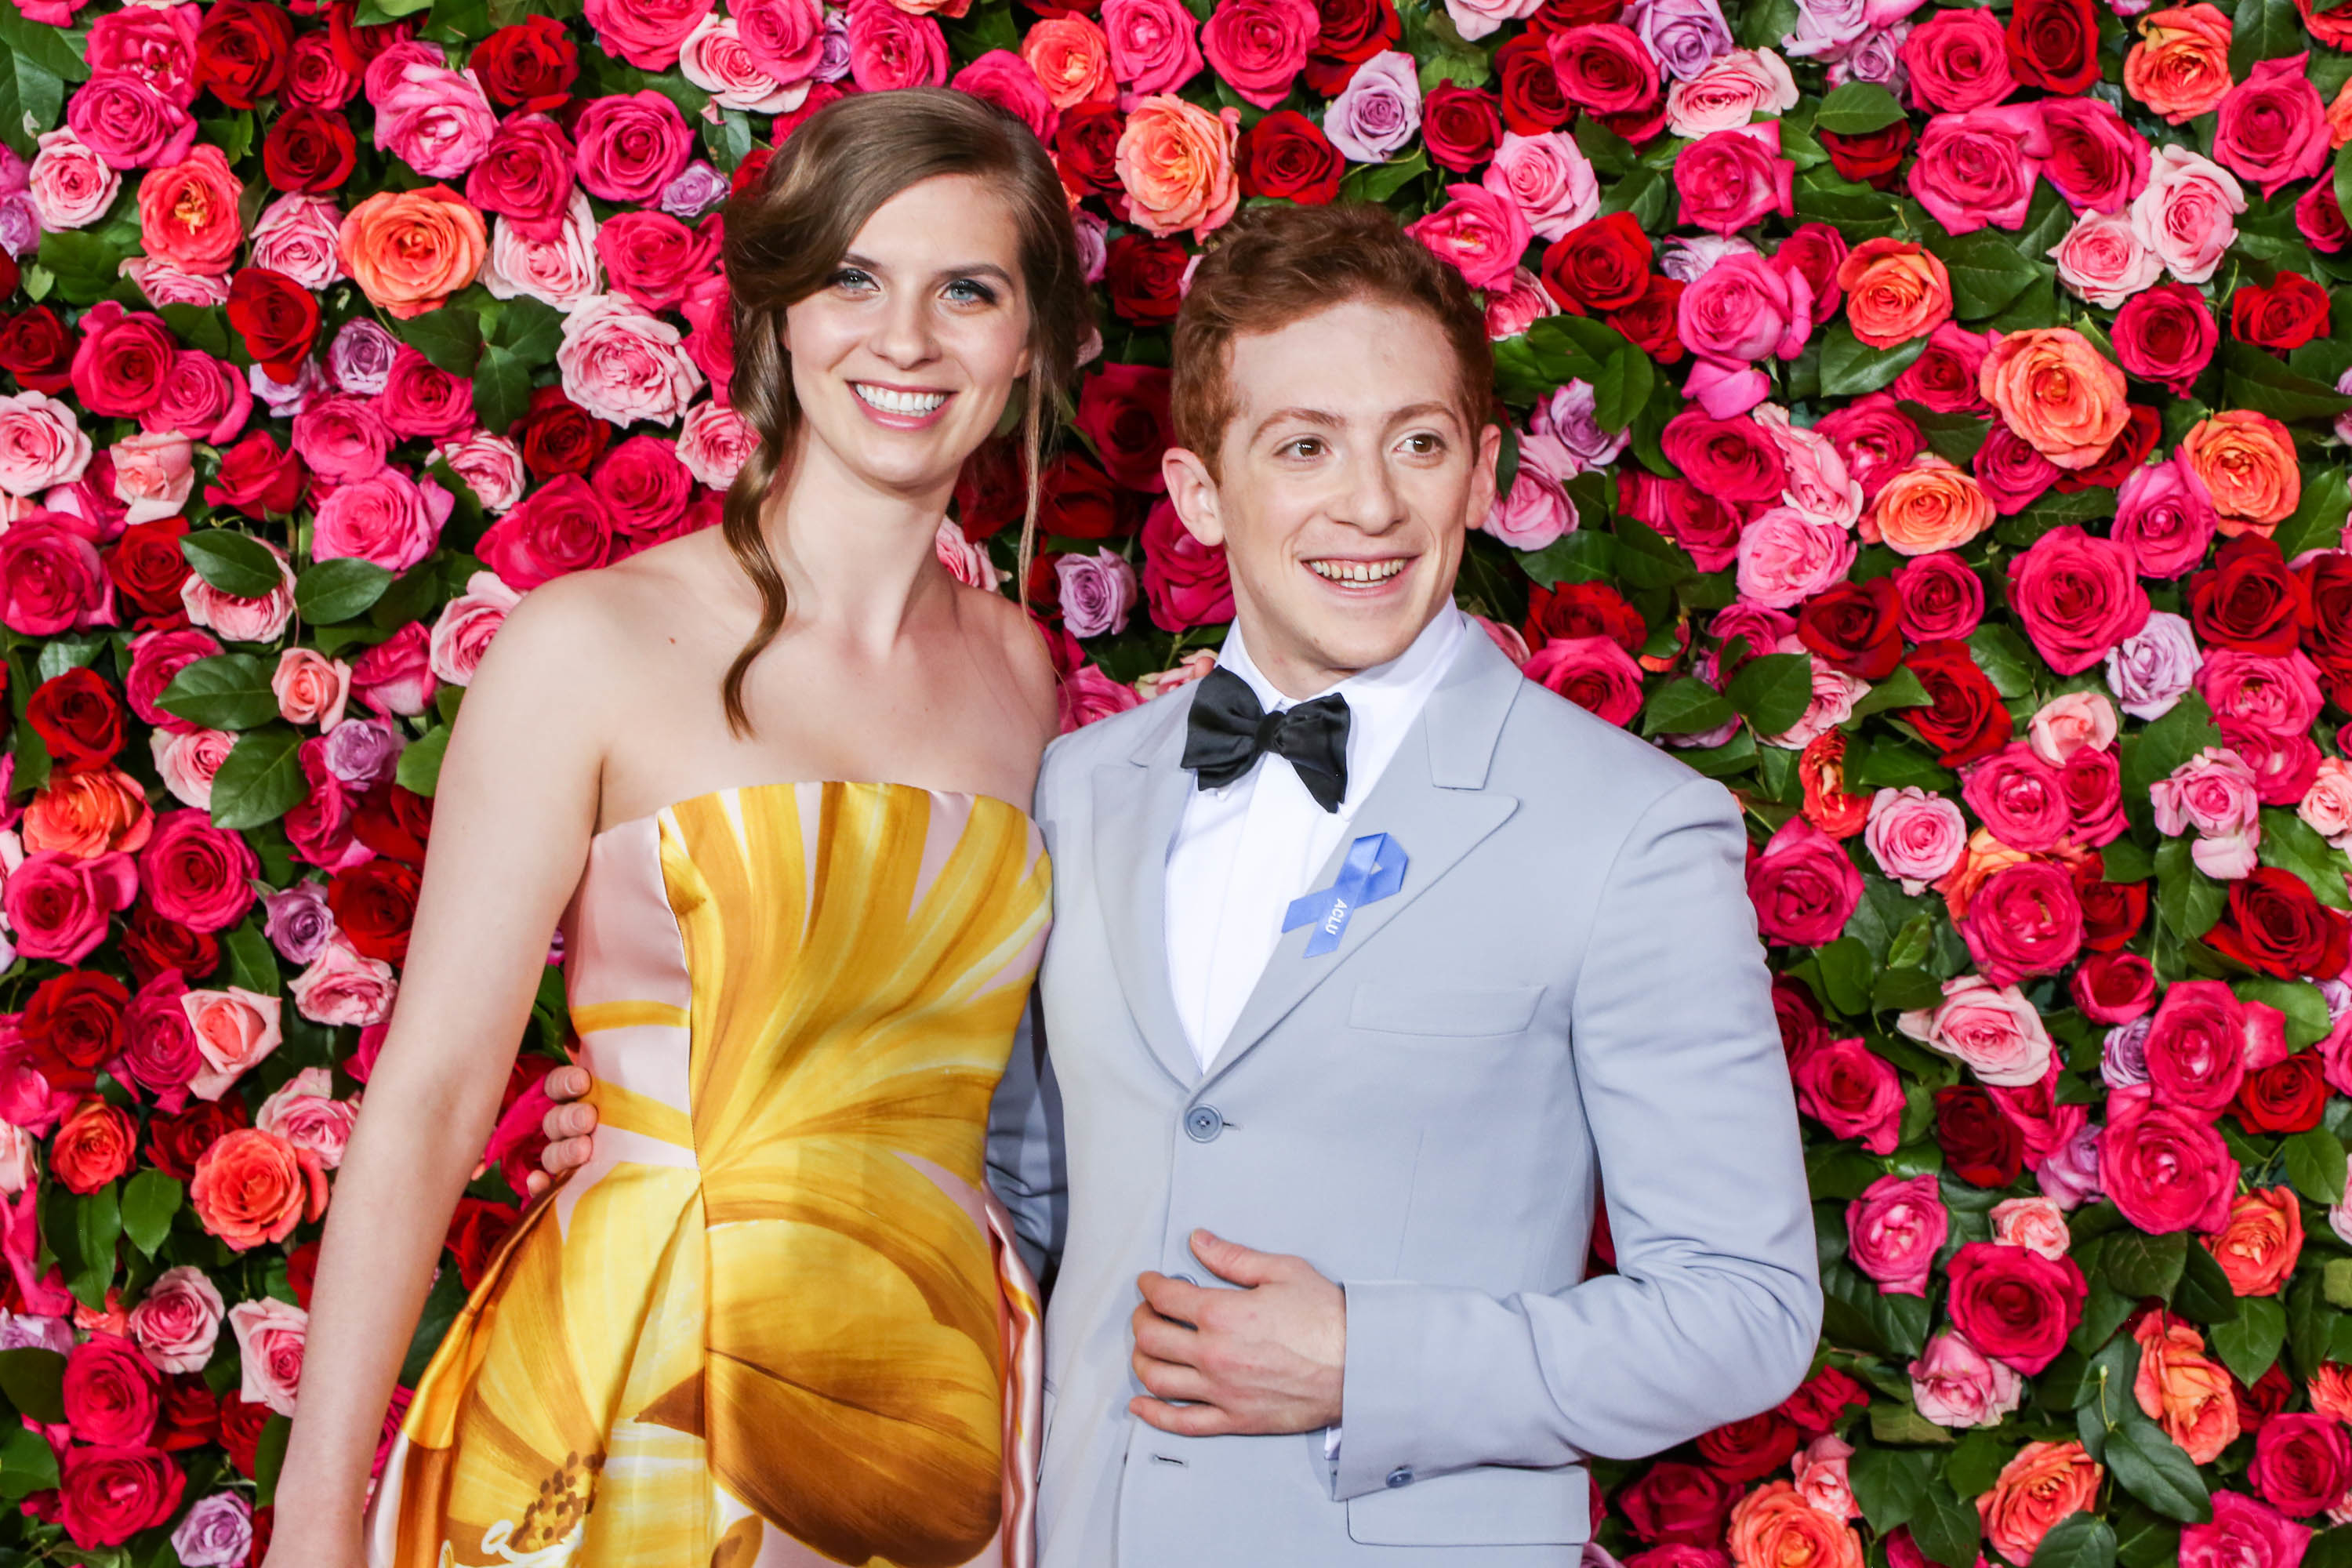 Two people posing in front of a floral backdrop, one in a patterned dress and the other in a light-colored suit